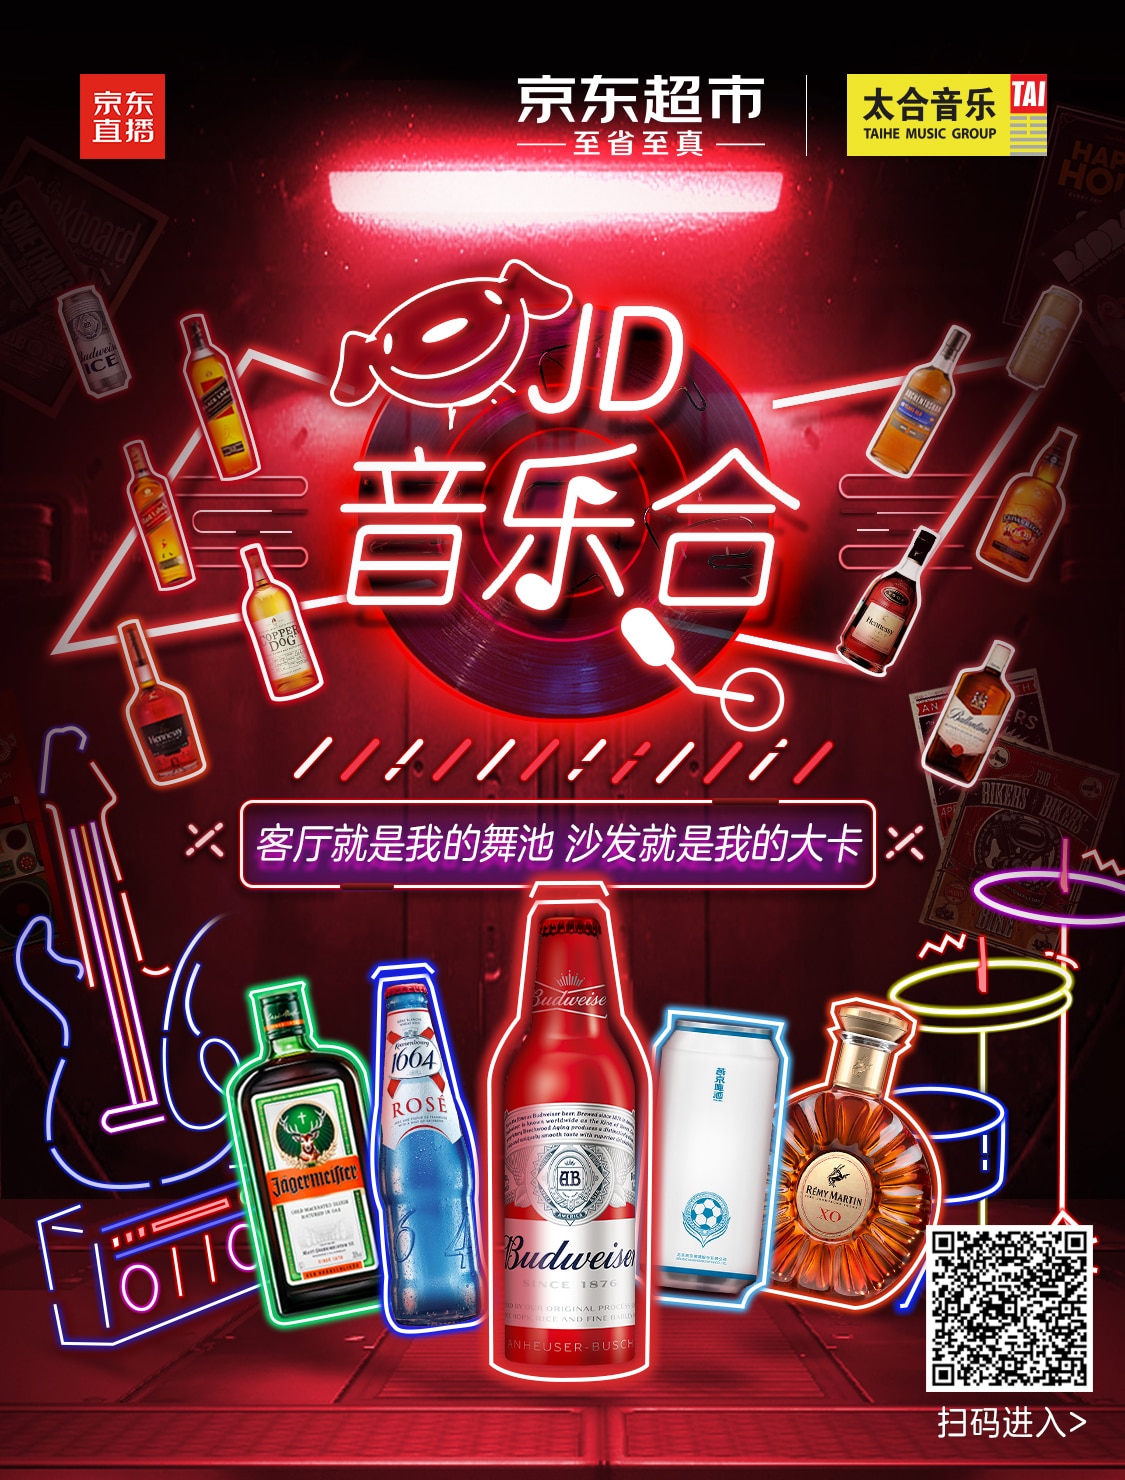 JD has teamed up with Taihe Music Group and multiple international liquor brands to bring entertainment online and drive liquor sales.